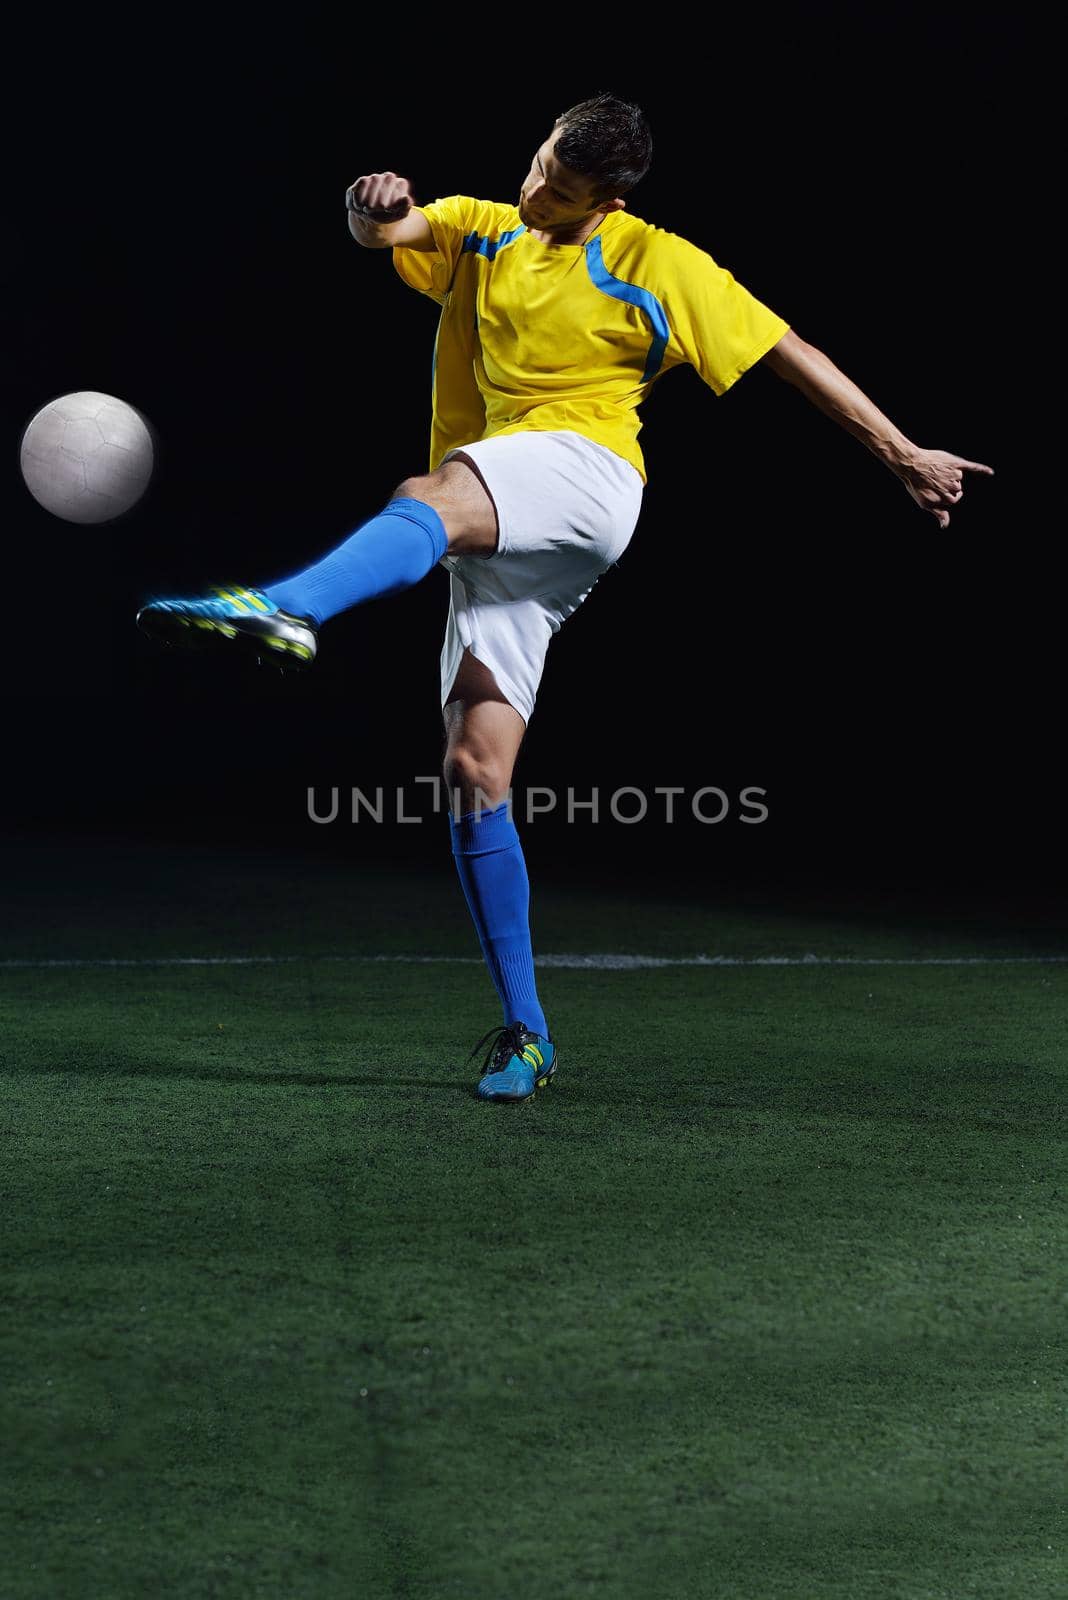 soccer player by dotshock